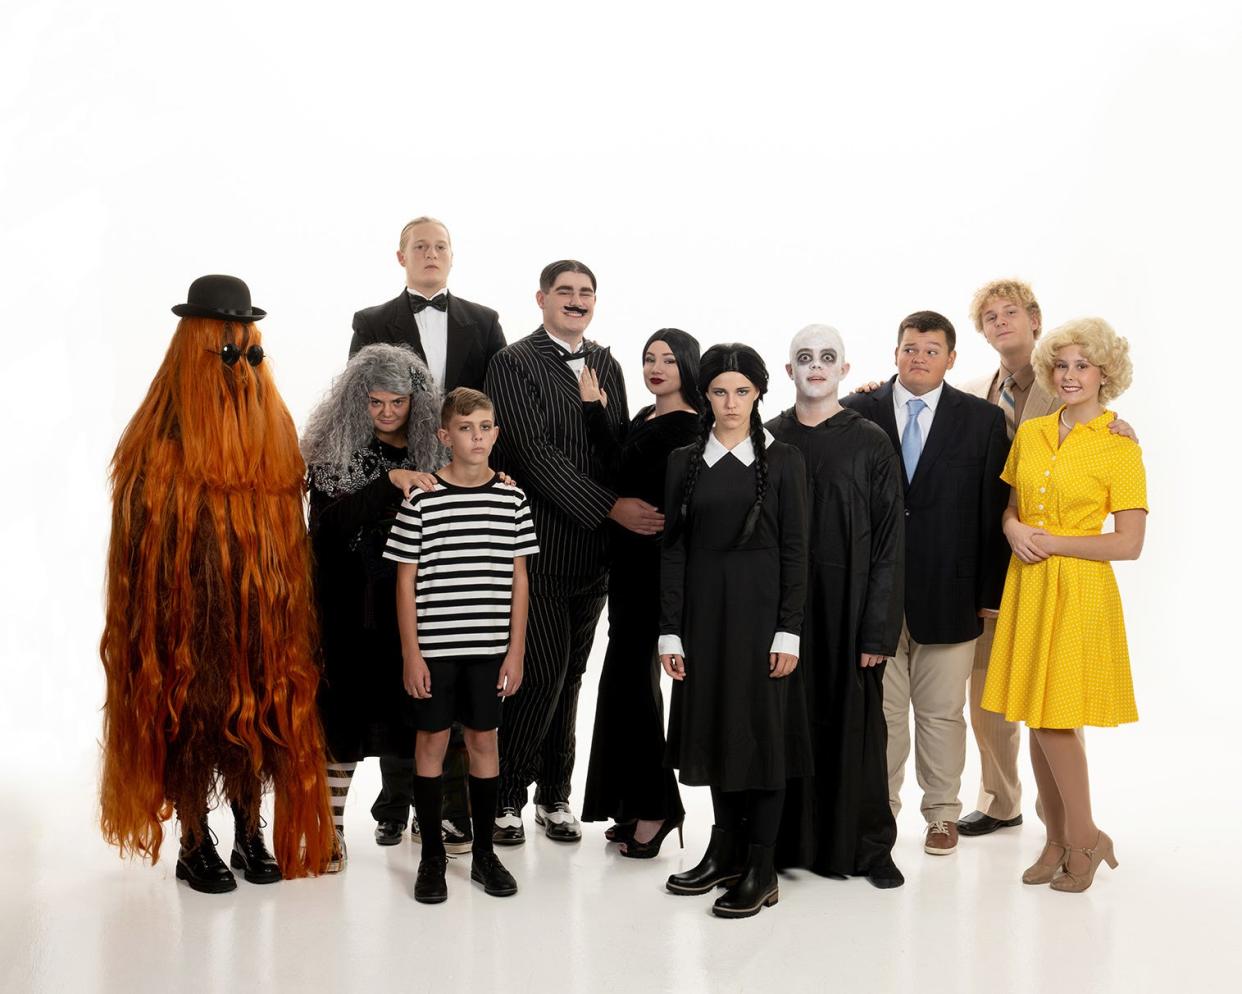 West Branch High School's first theater production of the 2023-24 school year will be the musical comedy "The Addams Family," featuring such students as Mollie McDorman as Cousin It; Alli Kanagy as Wednesday Addams; Landon Hobbins as Pugsley Addams; Gavin Clay as Gomez Addams; and Charity Glista as Morticia Addams.